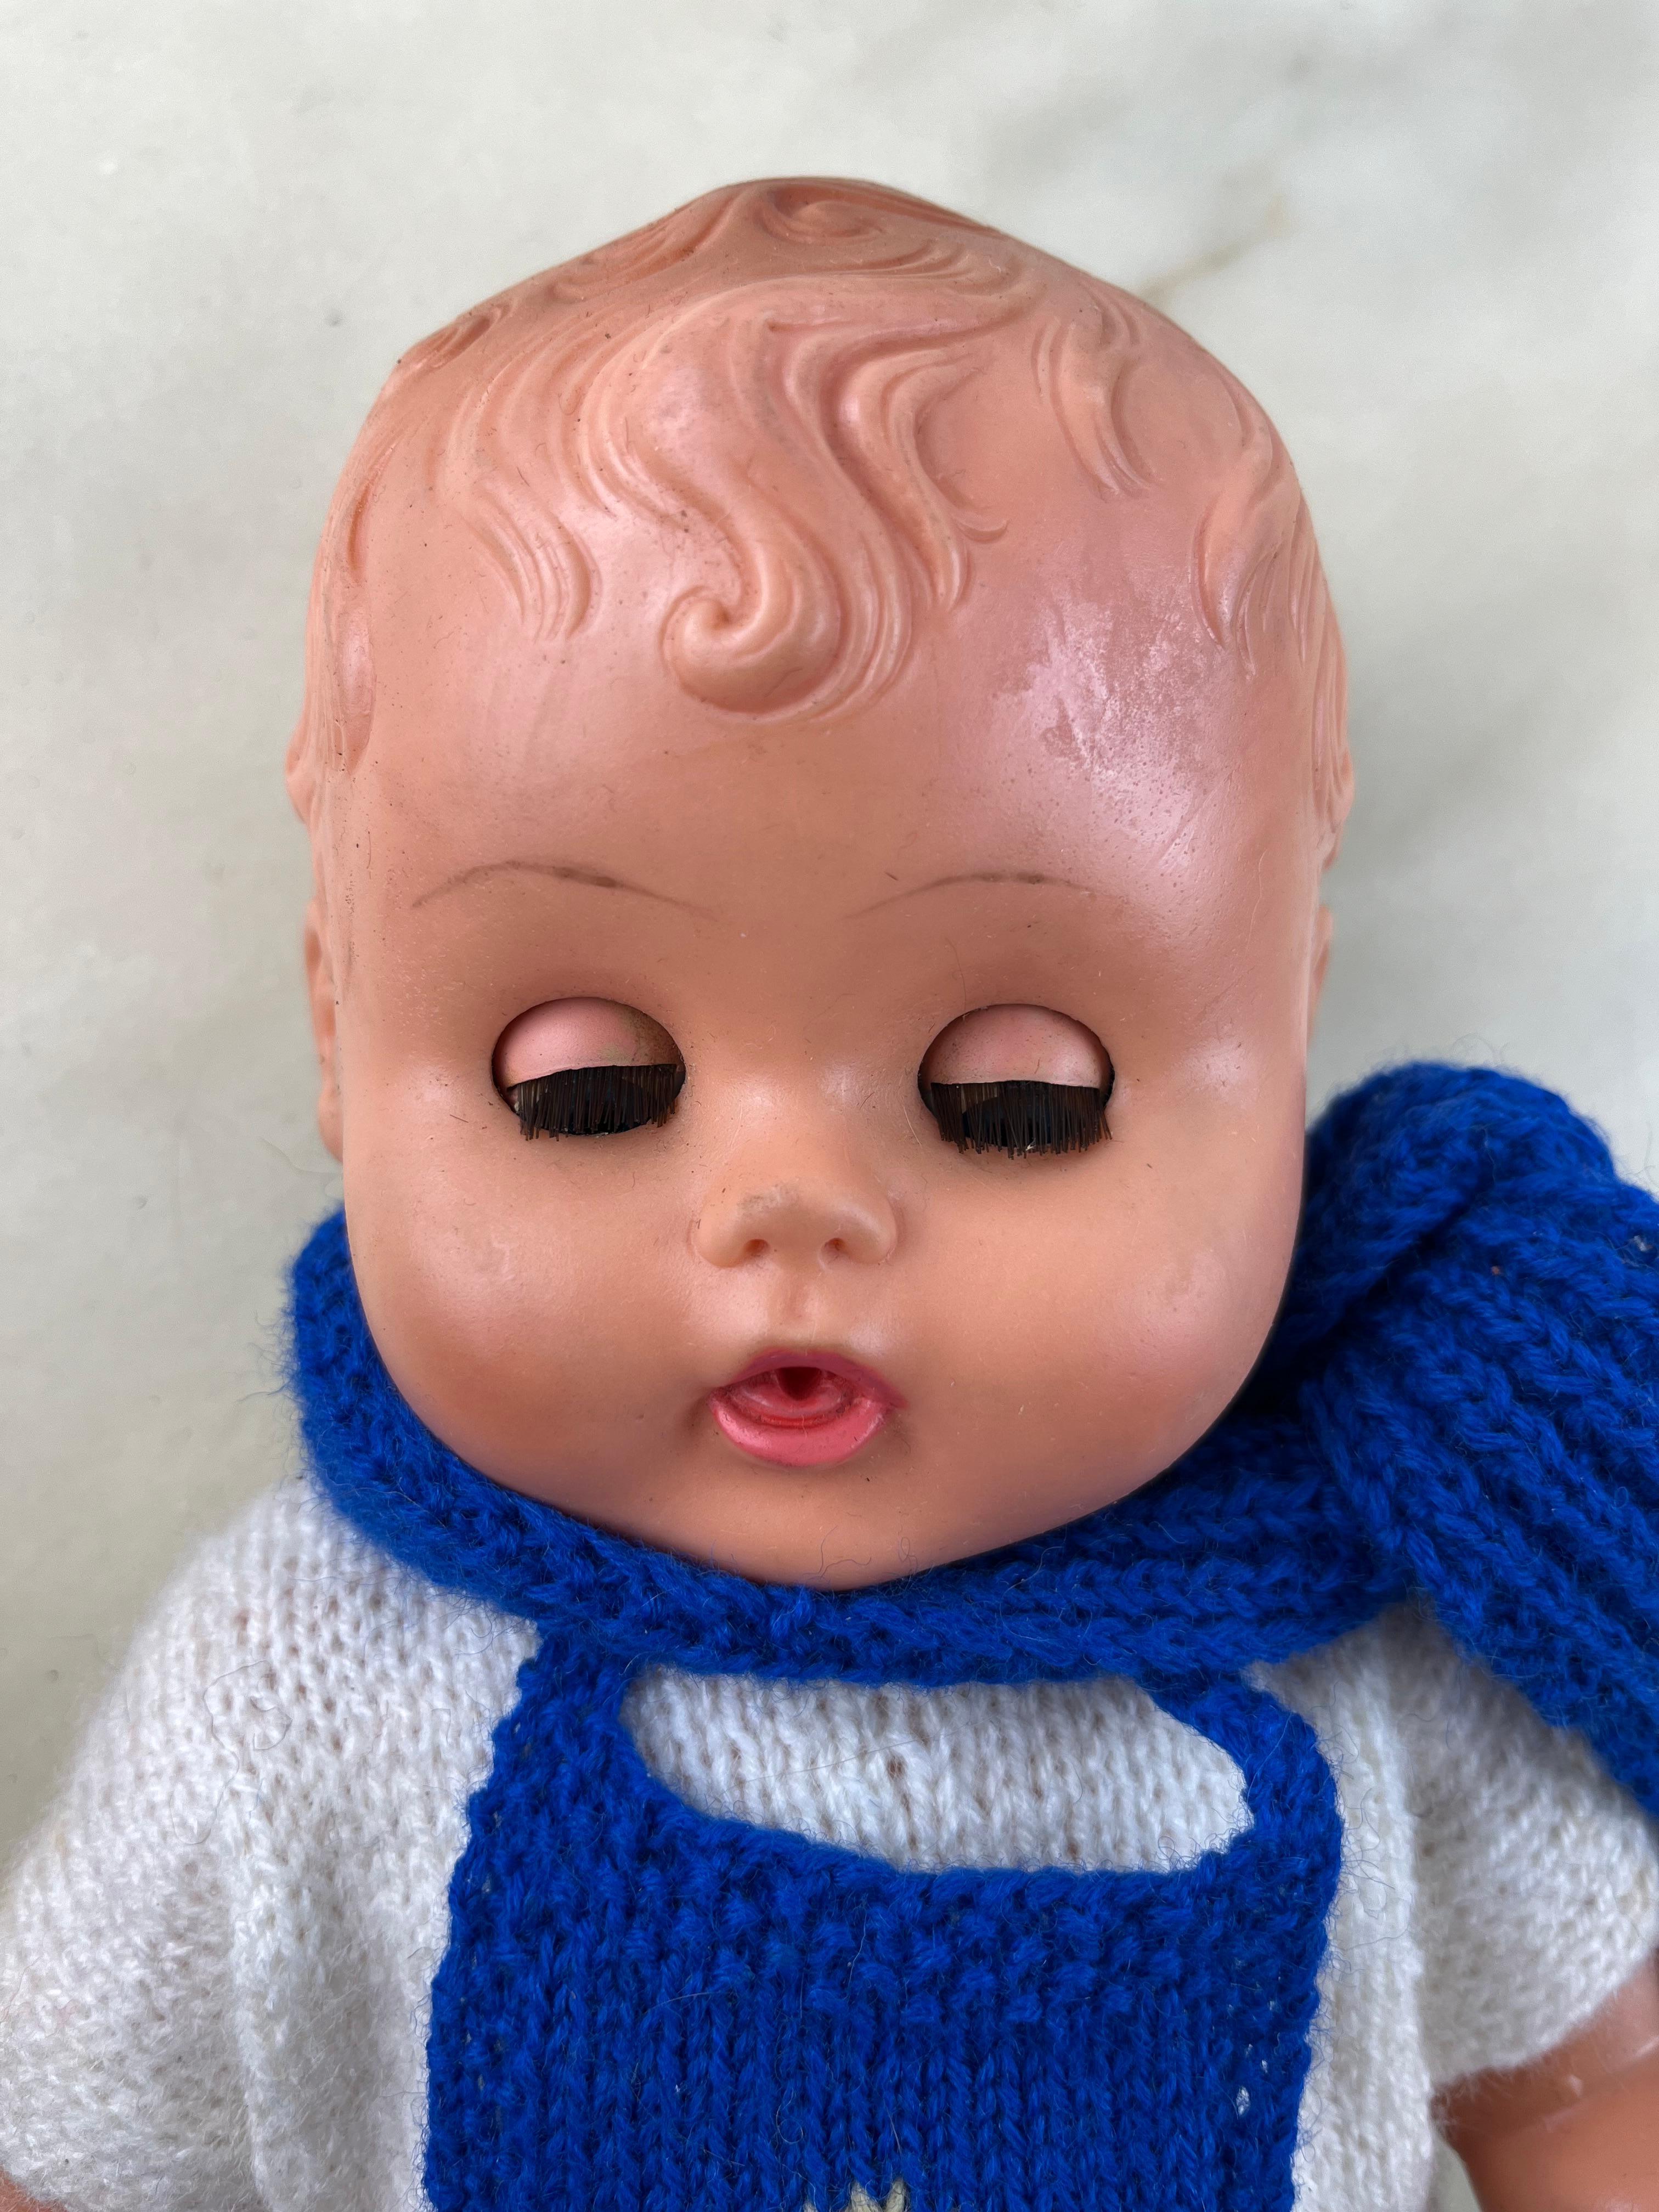 Italian doll, 1950s
When positioned horizontally the eyes close.
Height 40 cm.
Good conditions.